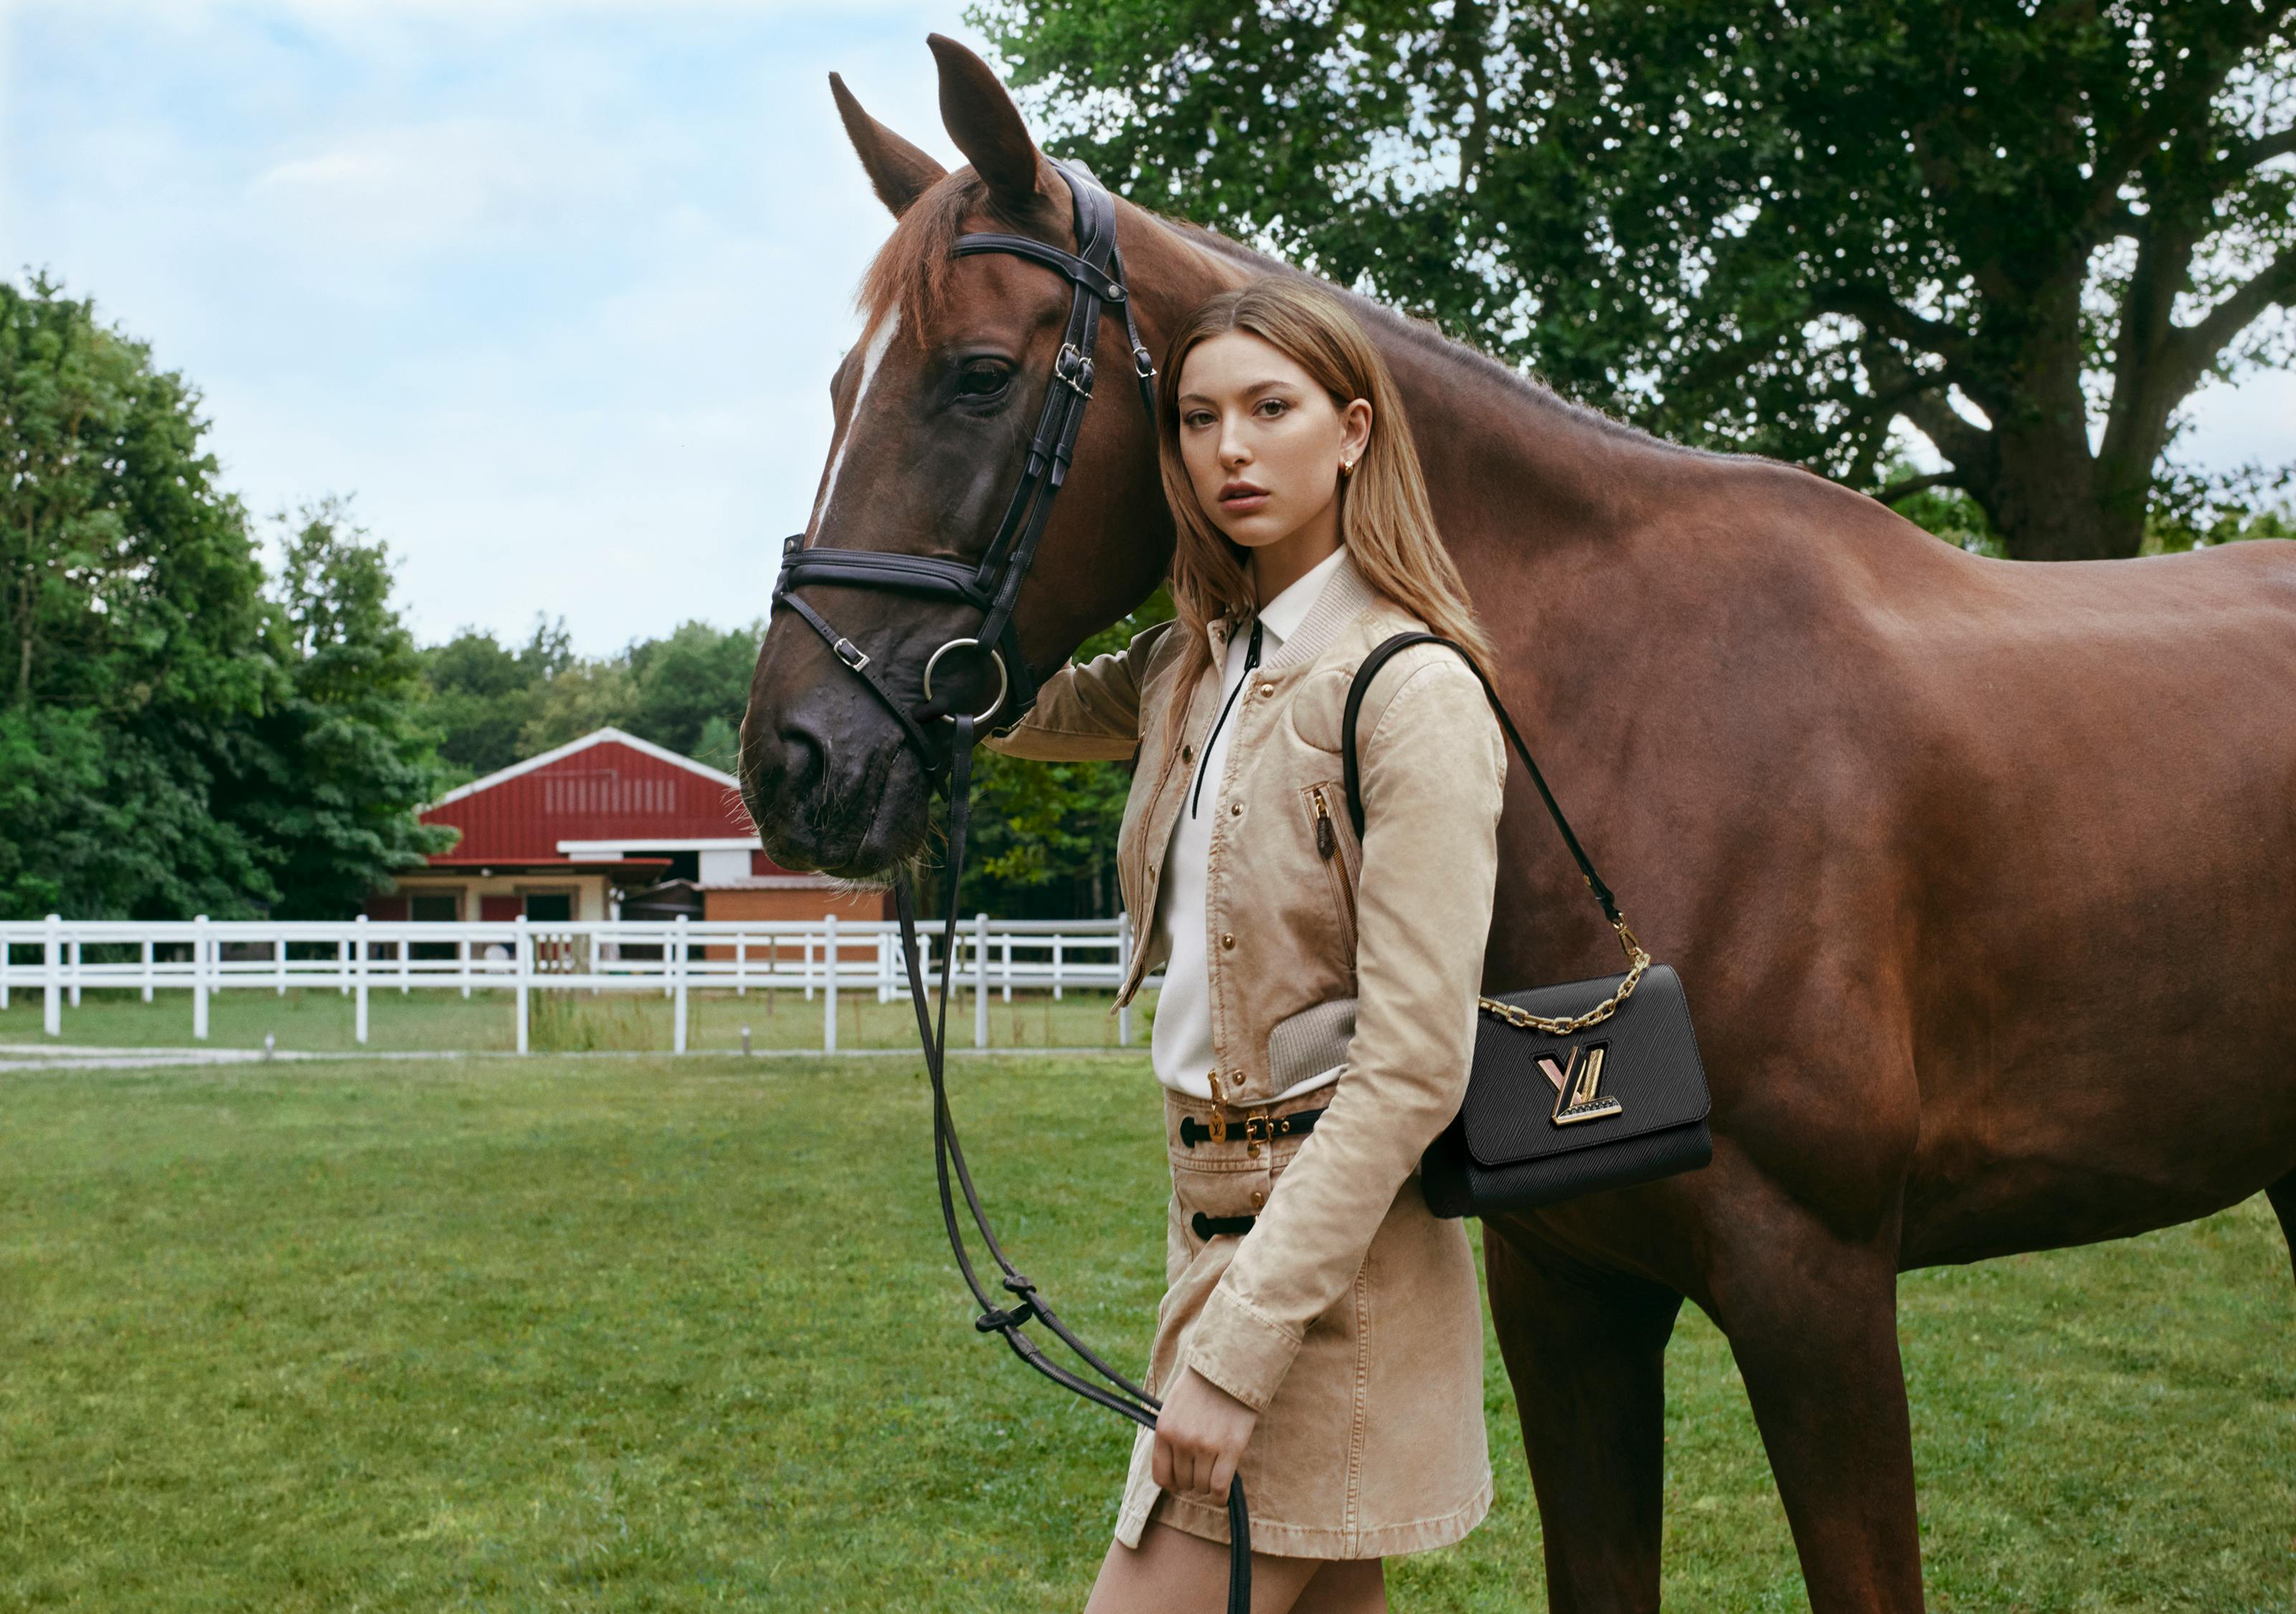 Louis Vuitton Adds a Twist with Eve Jobs